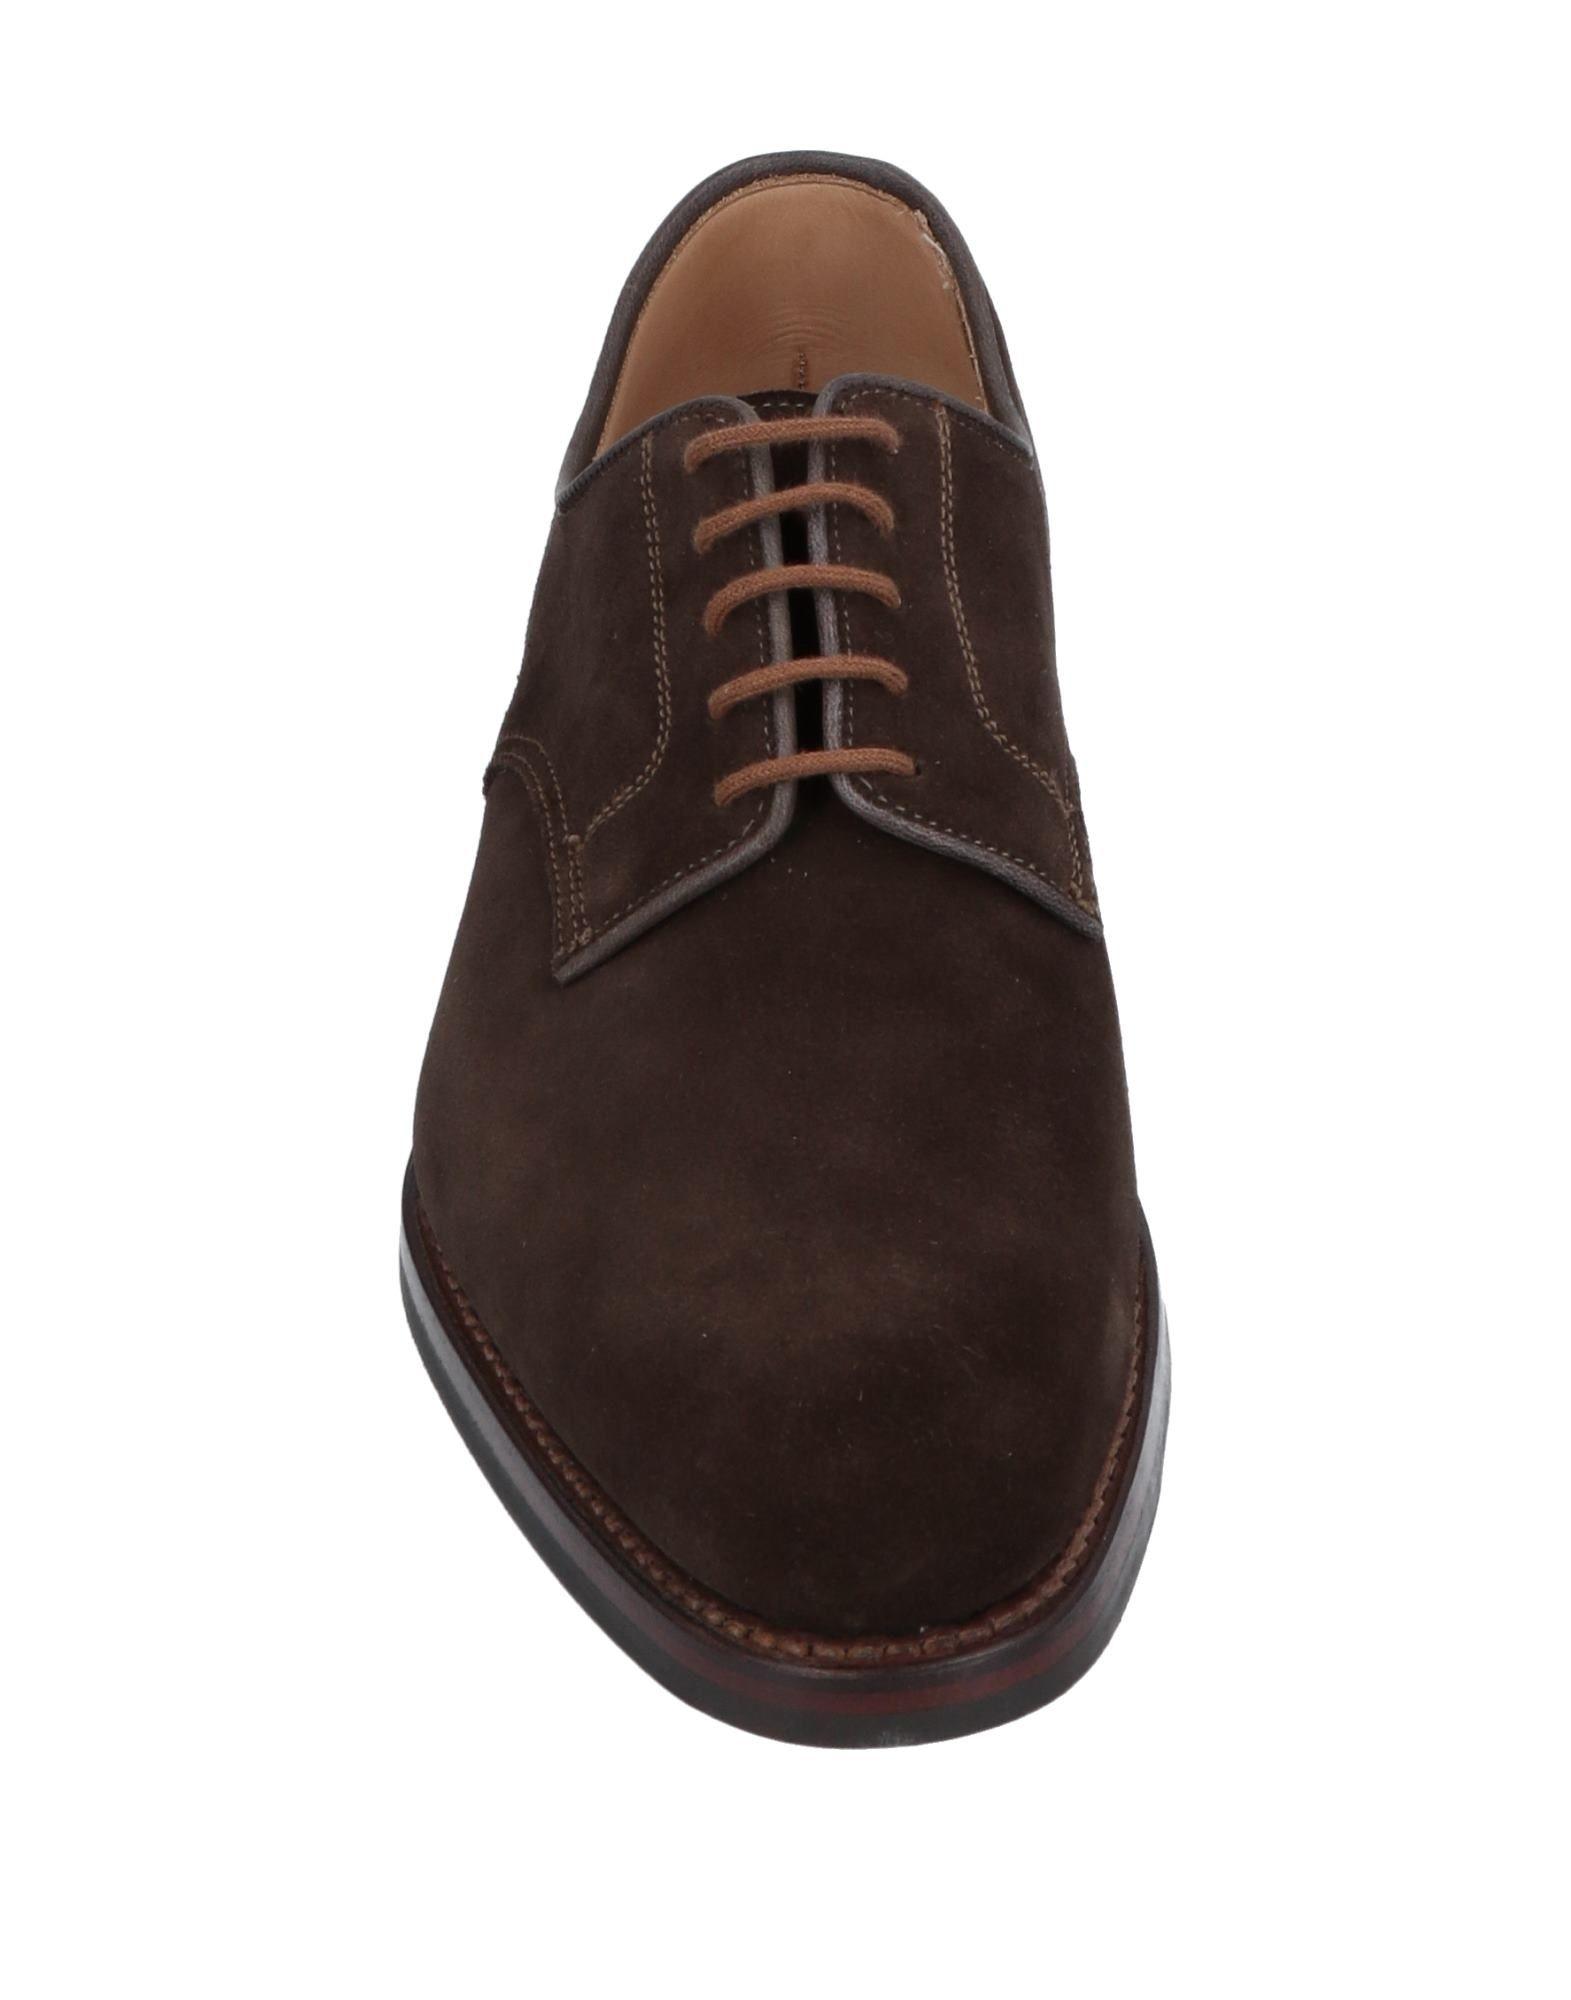 Crockett and Jones Leather Lace-up Shoe in Dark Brown (Brown) for Men ...